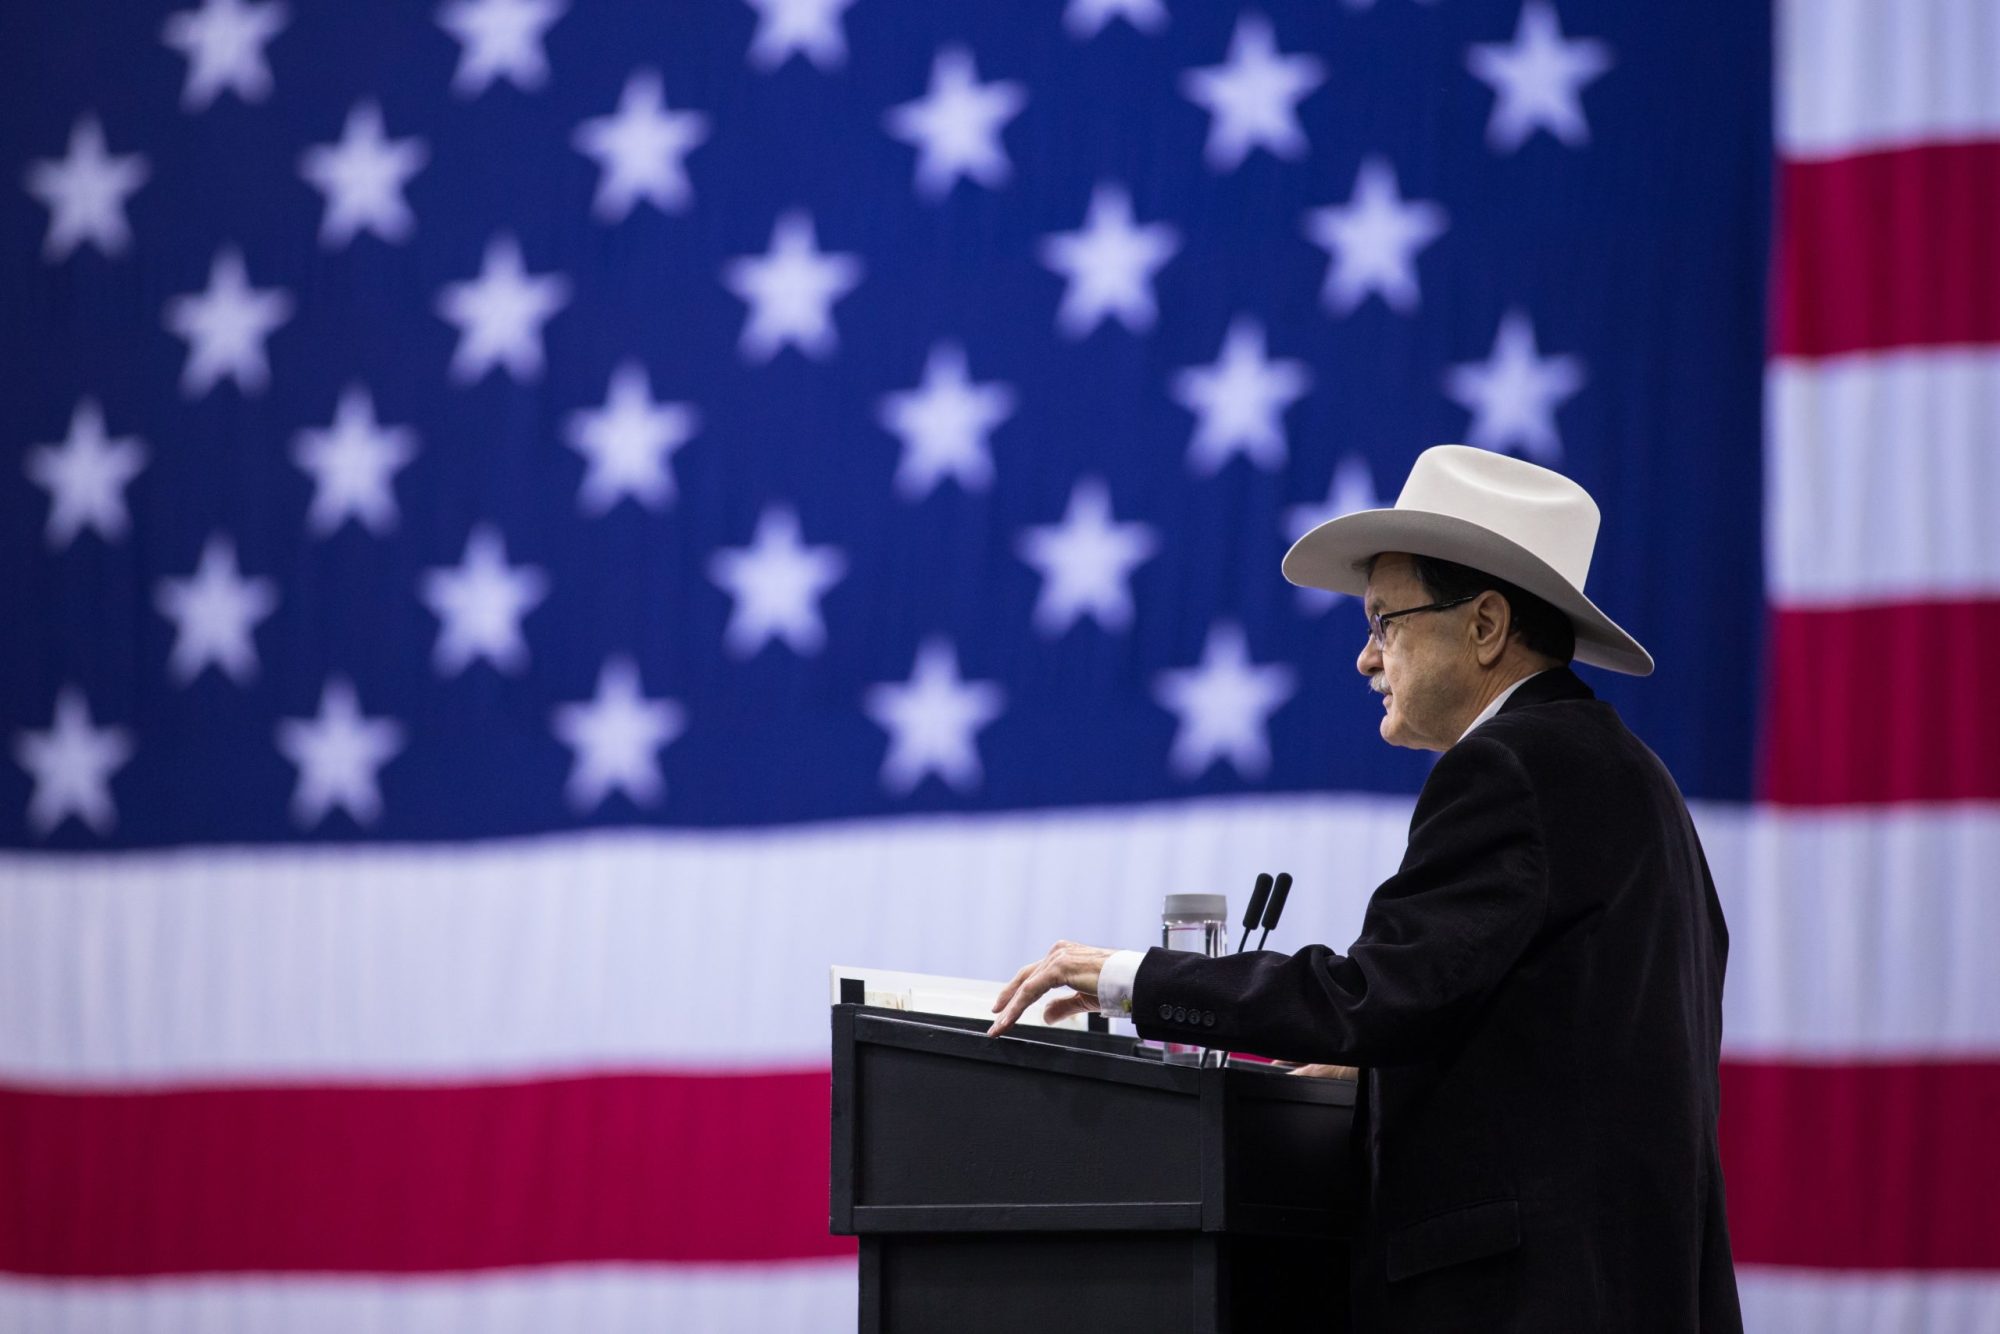 Jim Hightower speaks into a podium. He is wearing a black suit and a cream colored cowboy hat. Behind him is a gigantic American flag.